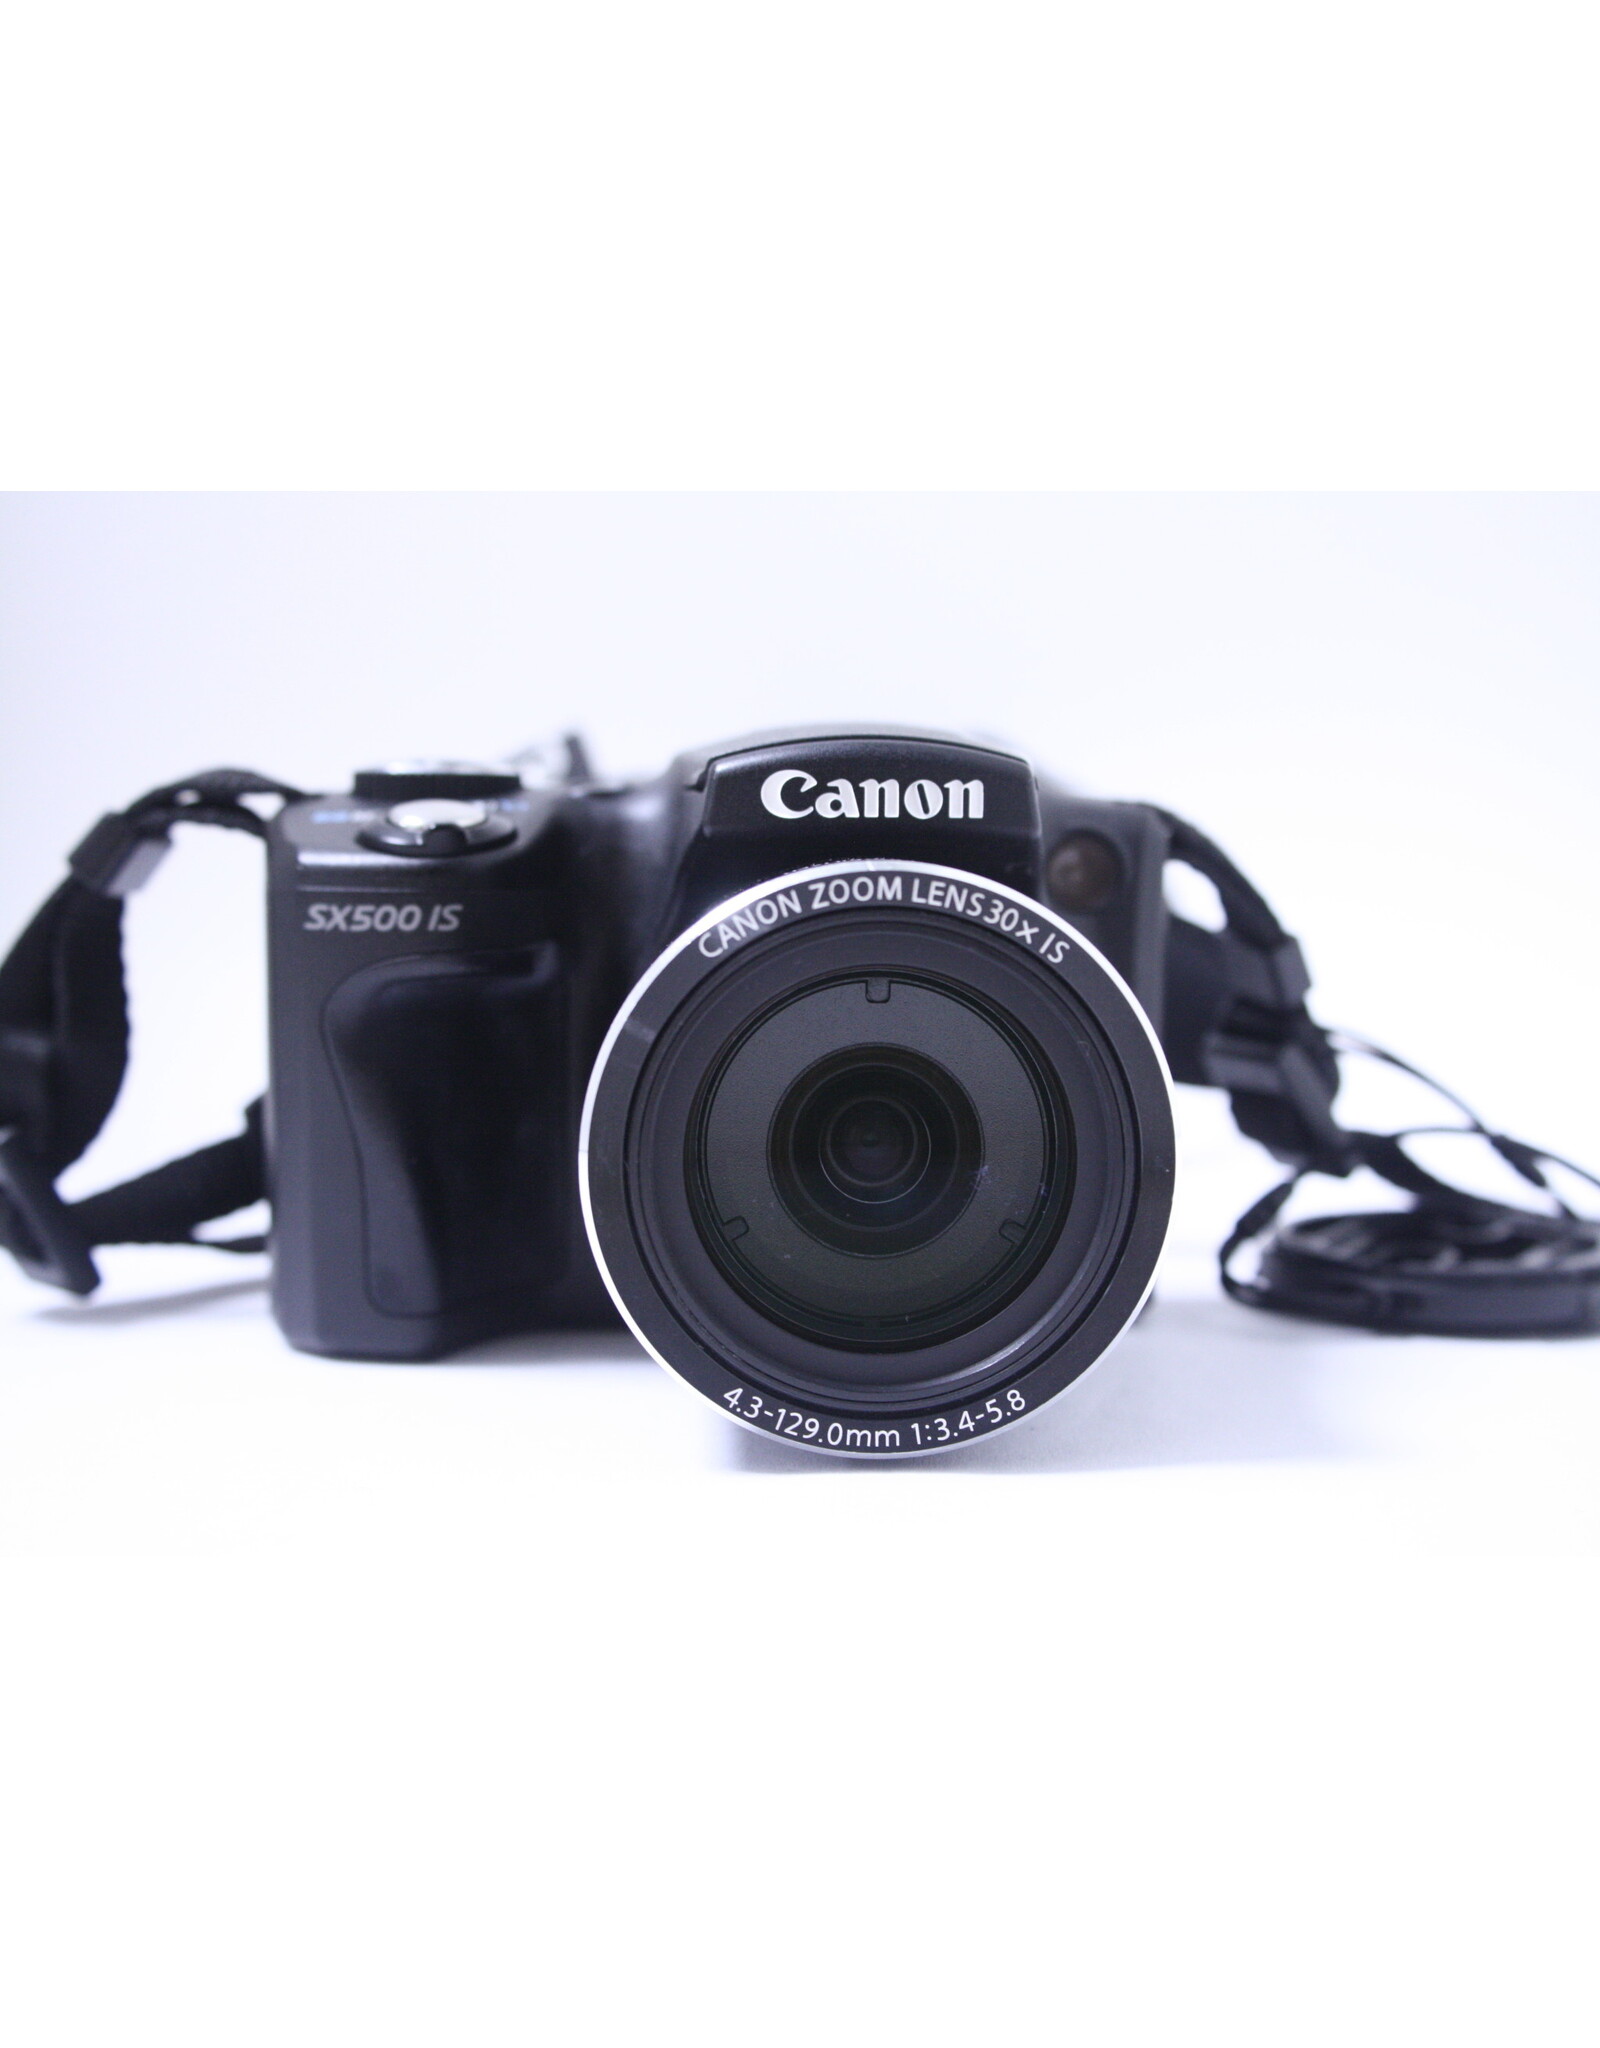 Canon Canon PowerShot SX500 IS 16.0MP Digital Camera - Black with Case (Pre-owned)